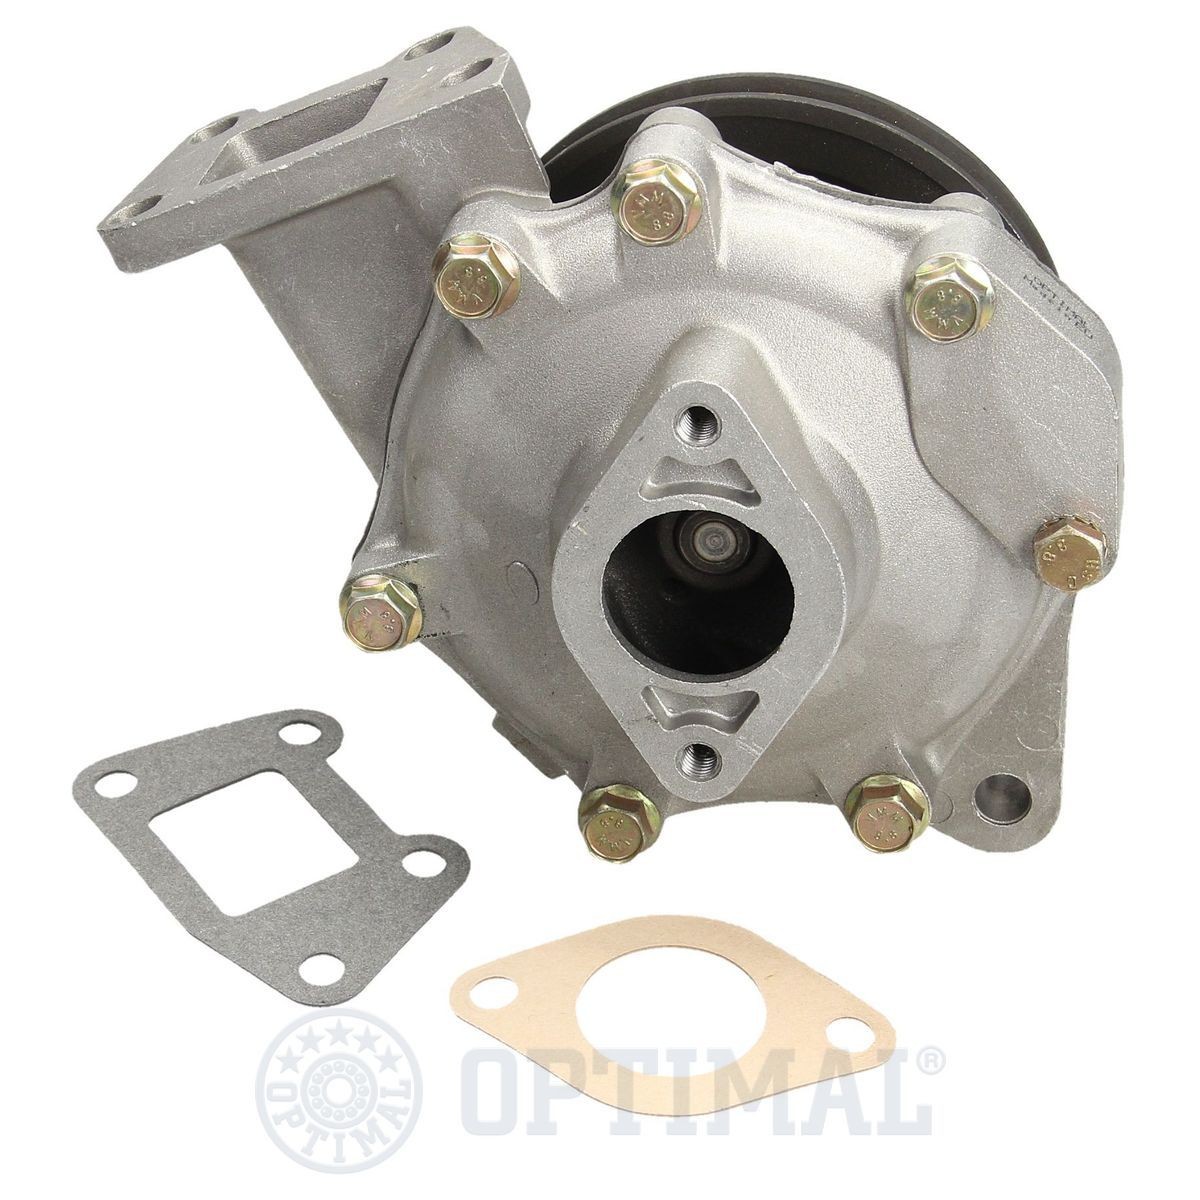 OPTIMAL AQ-1624 Water pump with belt pulley, with gaskets/seals, Belt Pulley Ø: 131 mm, with housing